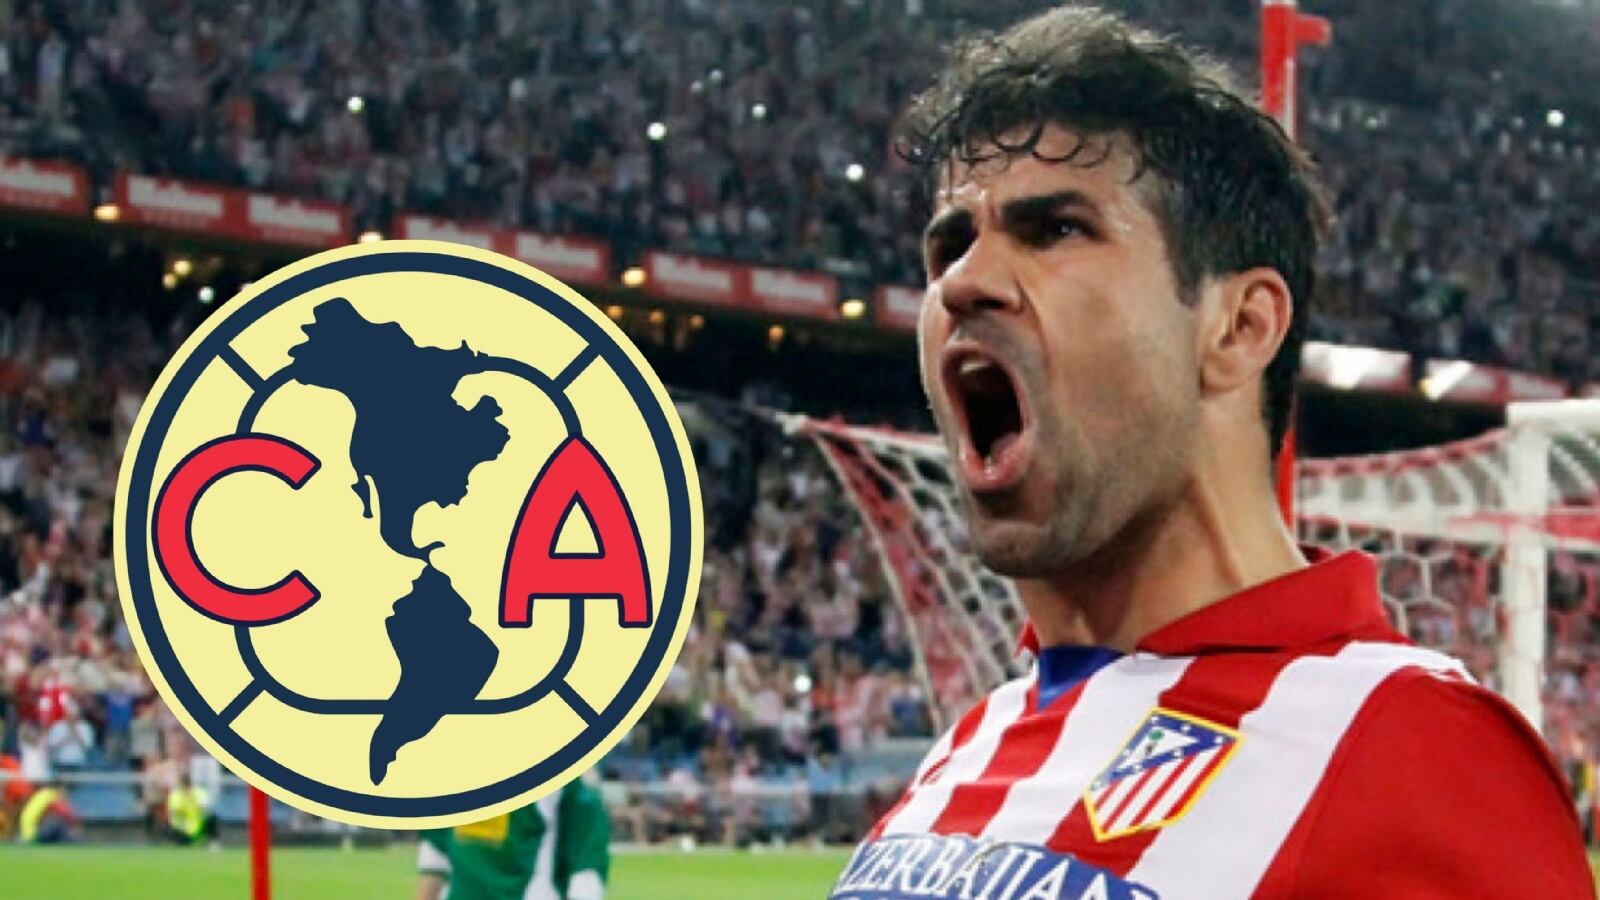 Club America wants to sign Diego Costa: the multi-millionaire contract they would offer him